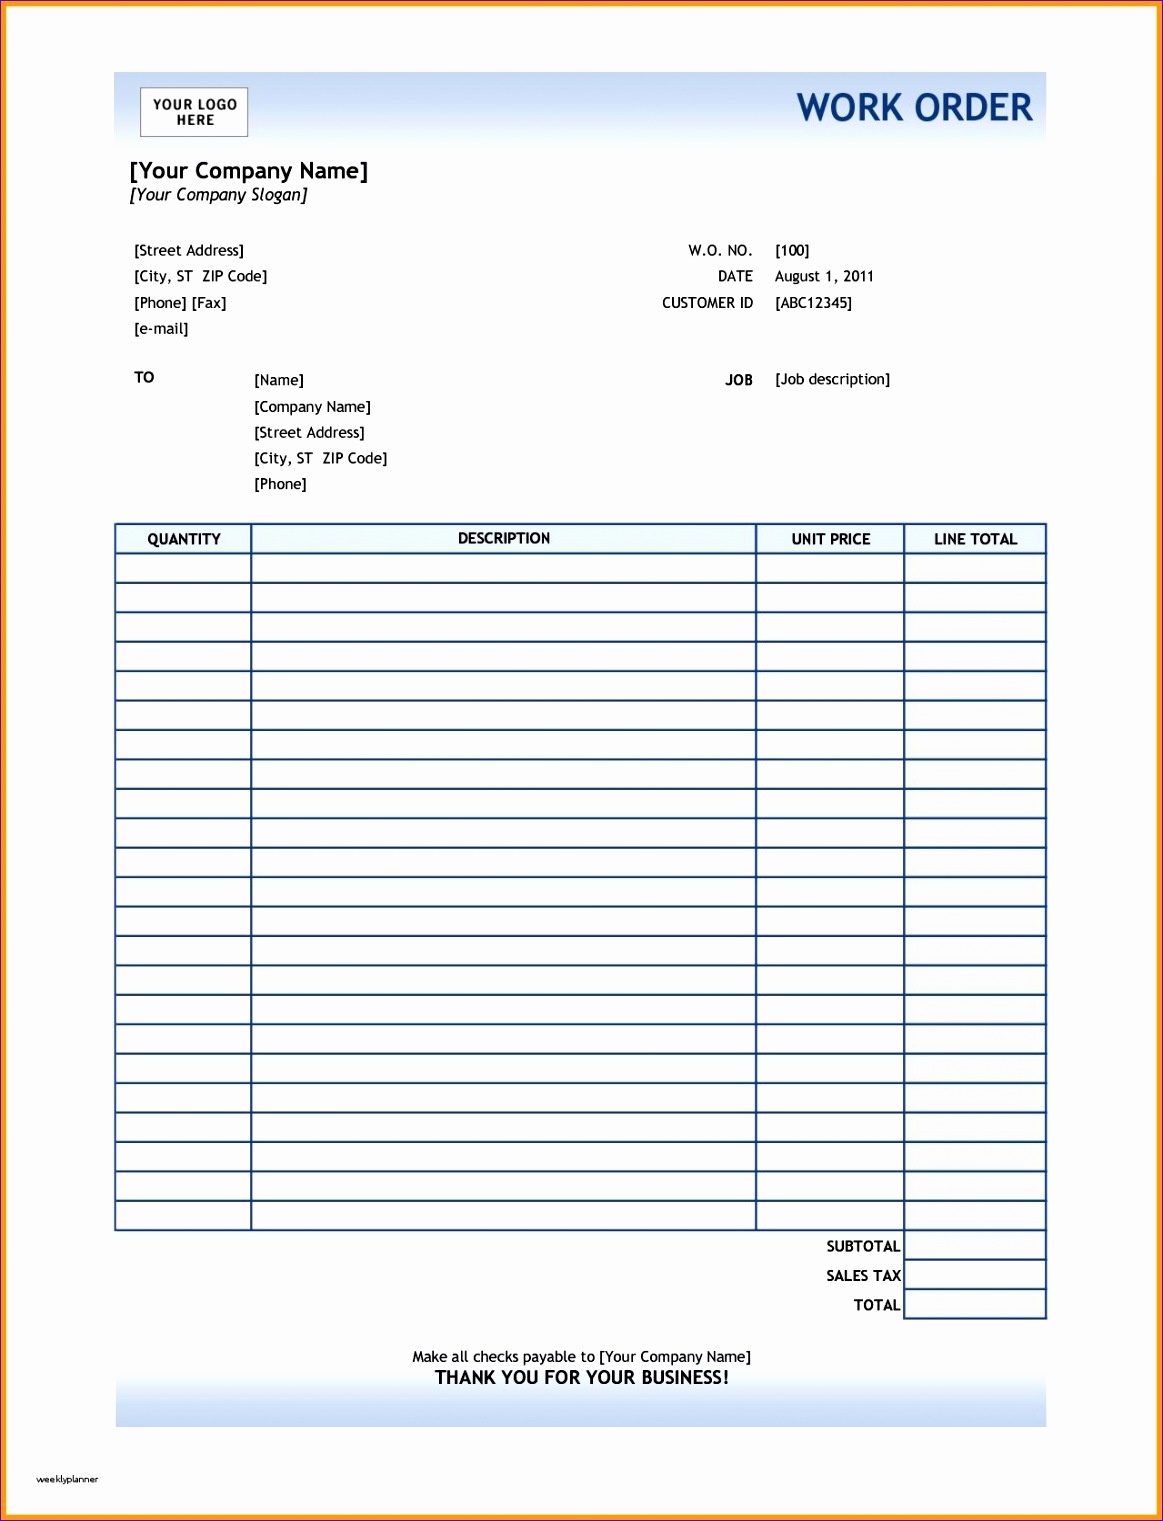 7 Job order form Template Excel - Excel Templates - Excel Templates